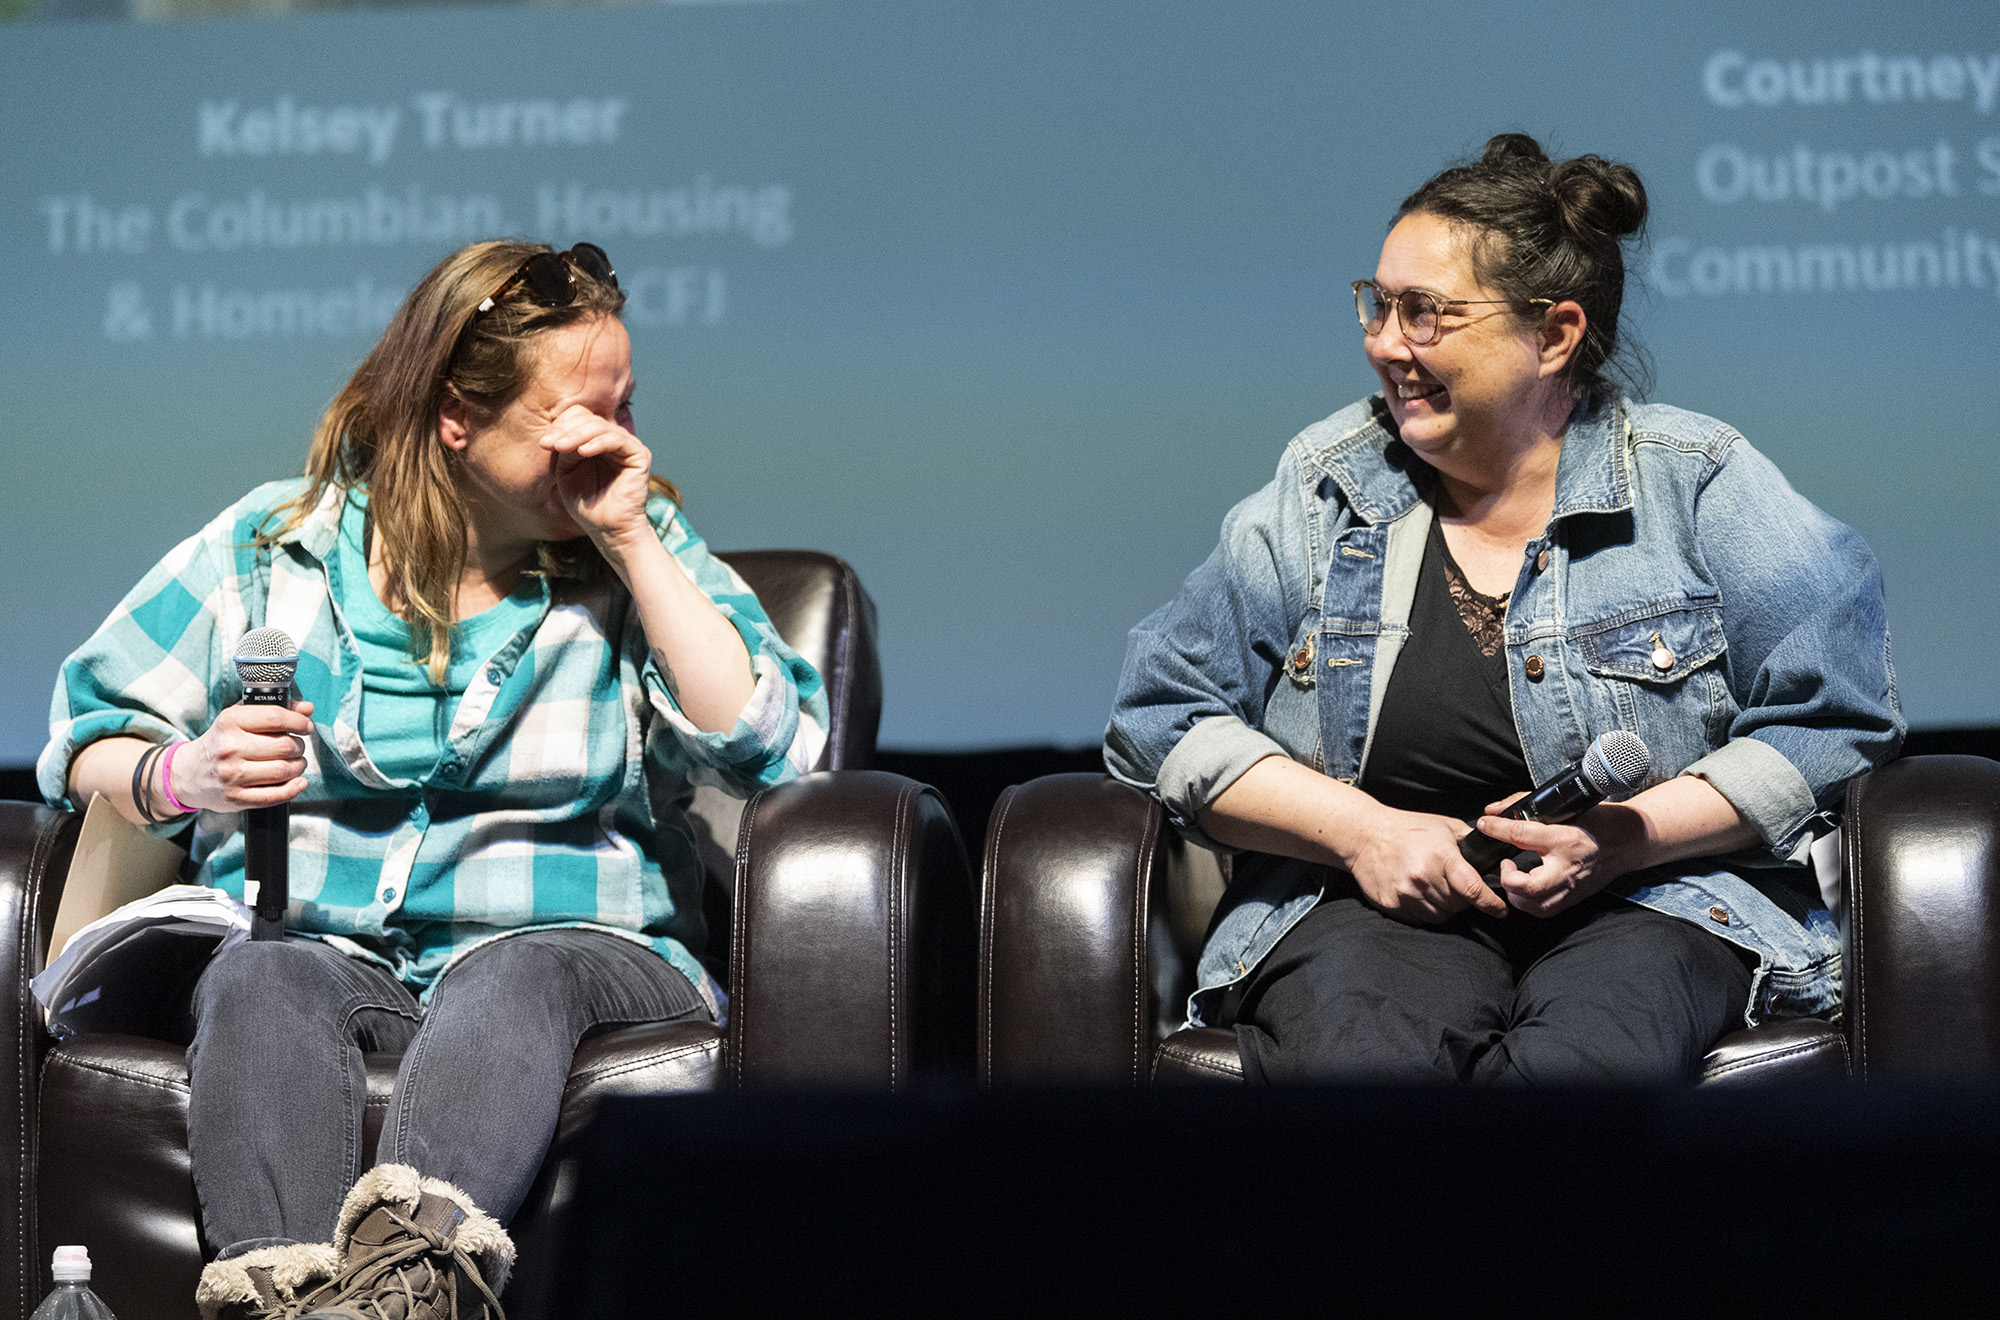 Outpost Safe Stay resident Courtney Ligman, left, chokes up thinking about the help she has received from City of Vancouver homelessness response coordinator Jamie Spinelli, right, and others on Wednesday, March 1, 2023, during The Columbian Conversations event at Kiggins Theatre.